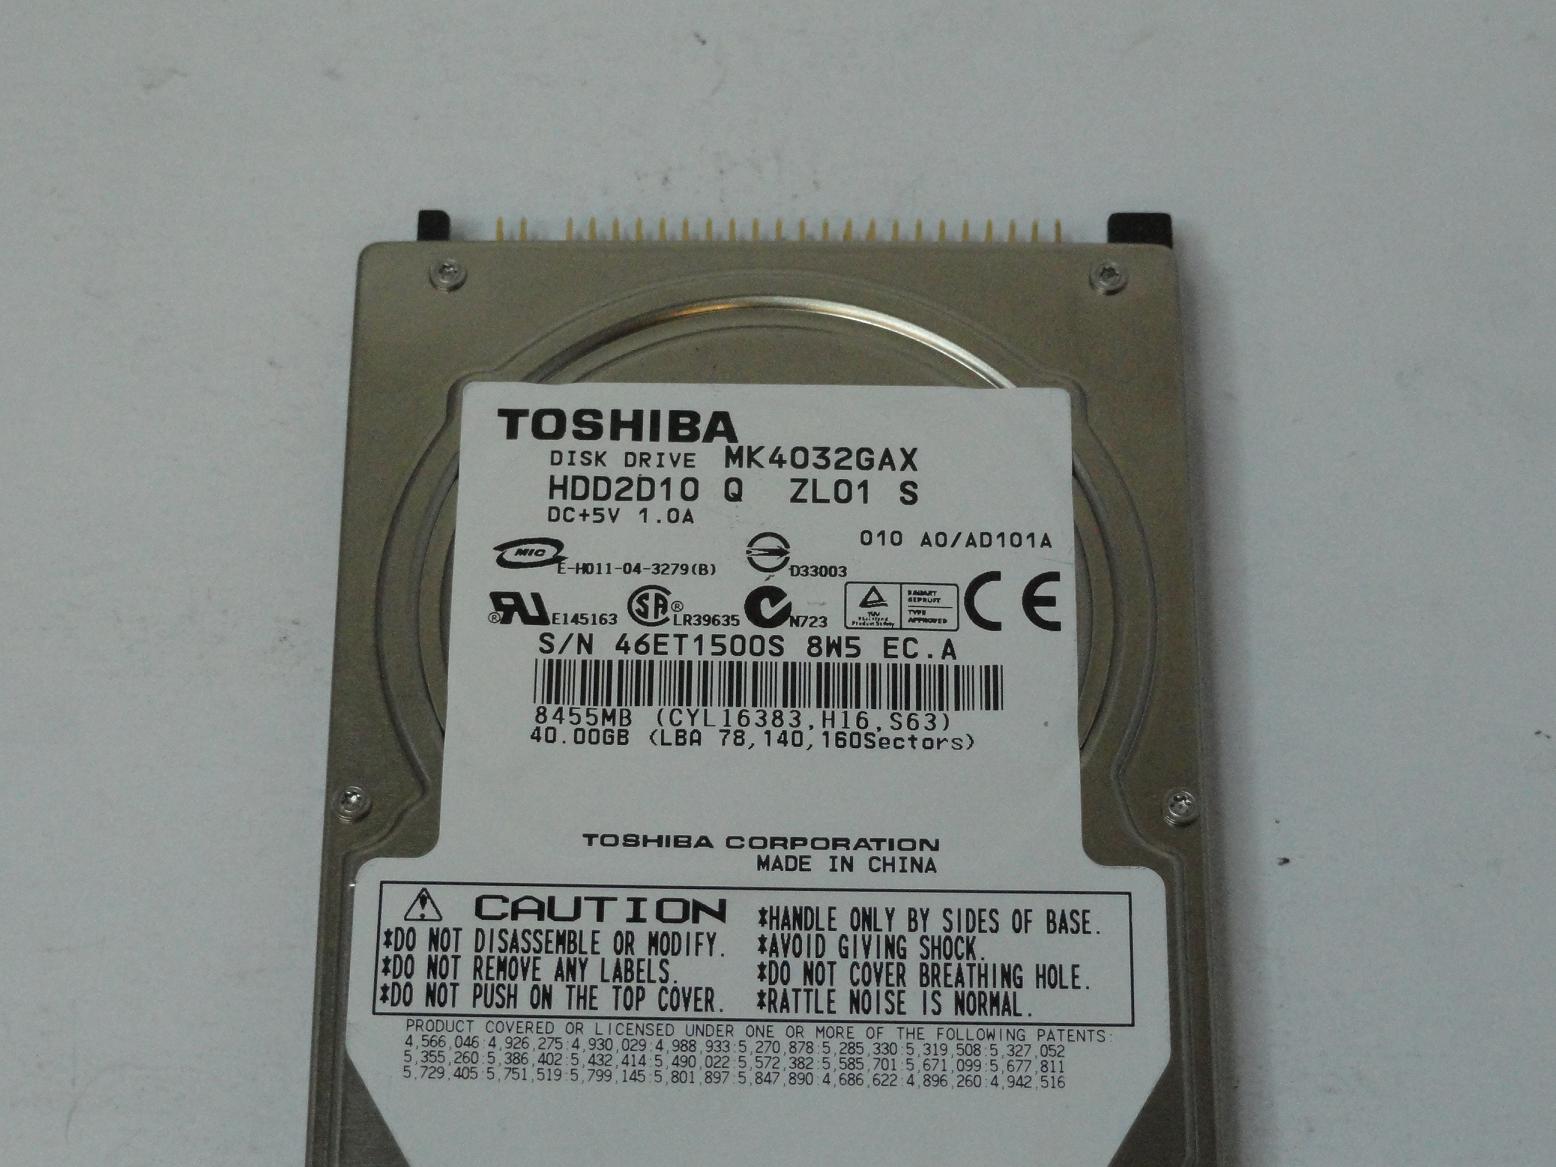 PR14912_HDD2D10_Toshiba HP 40GB IDE 5400rpm 2.5in HDD - Image2